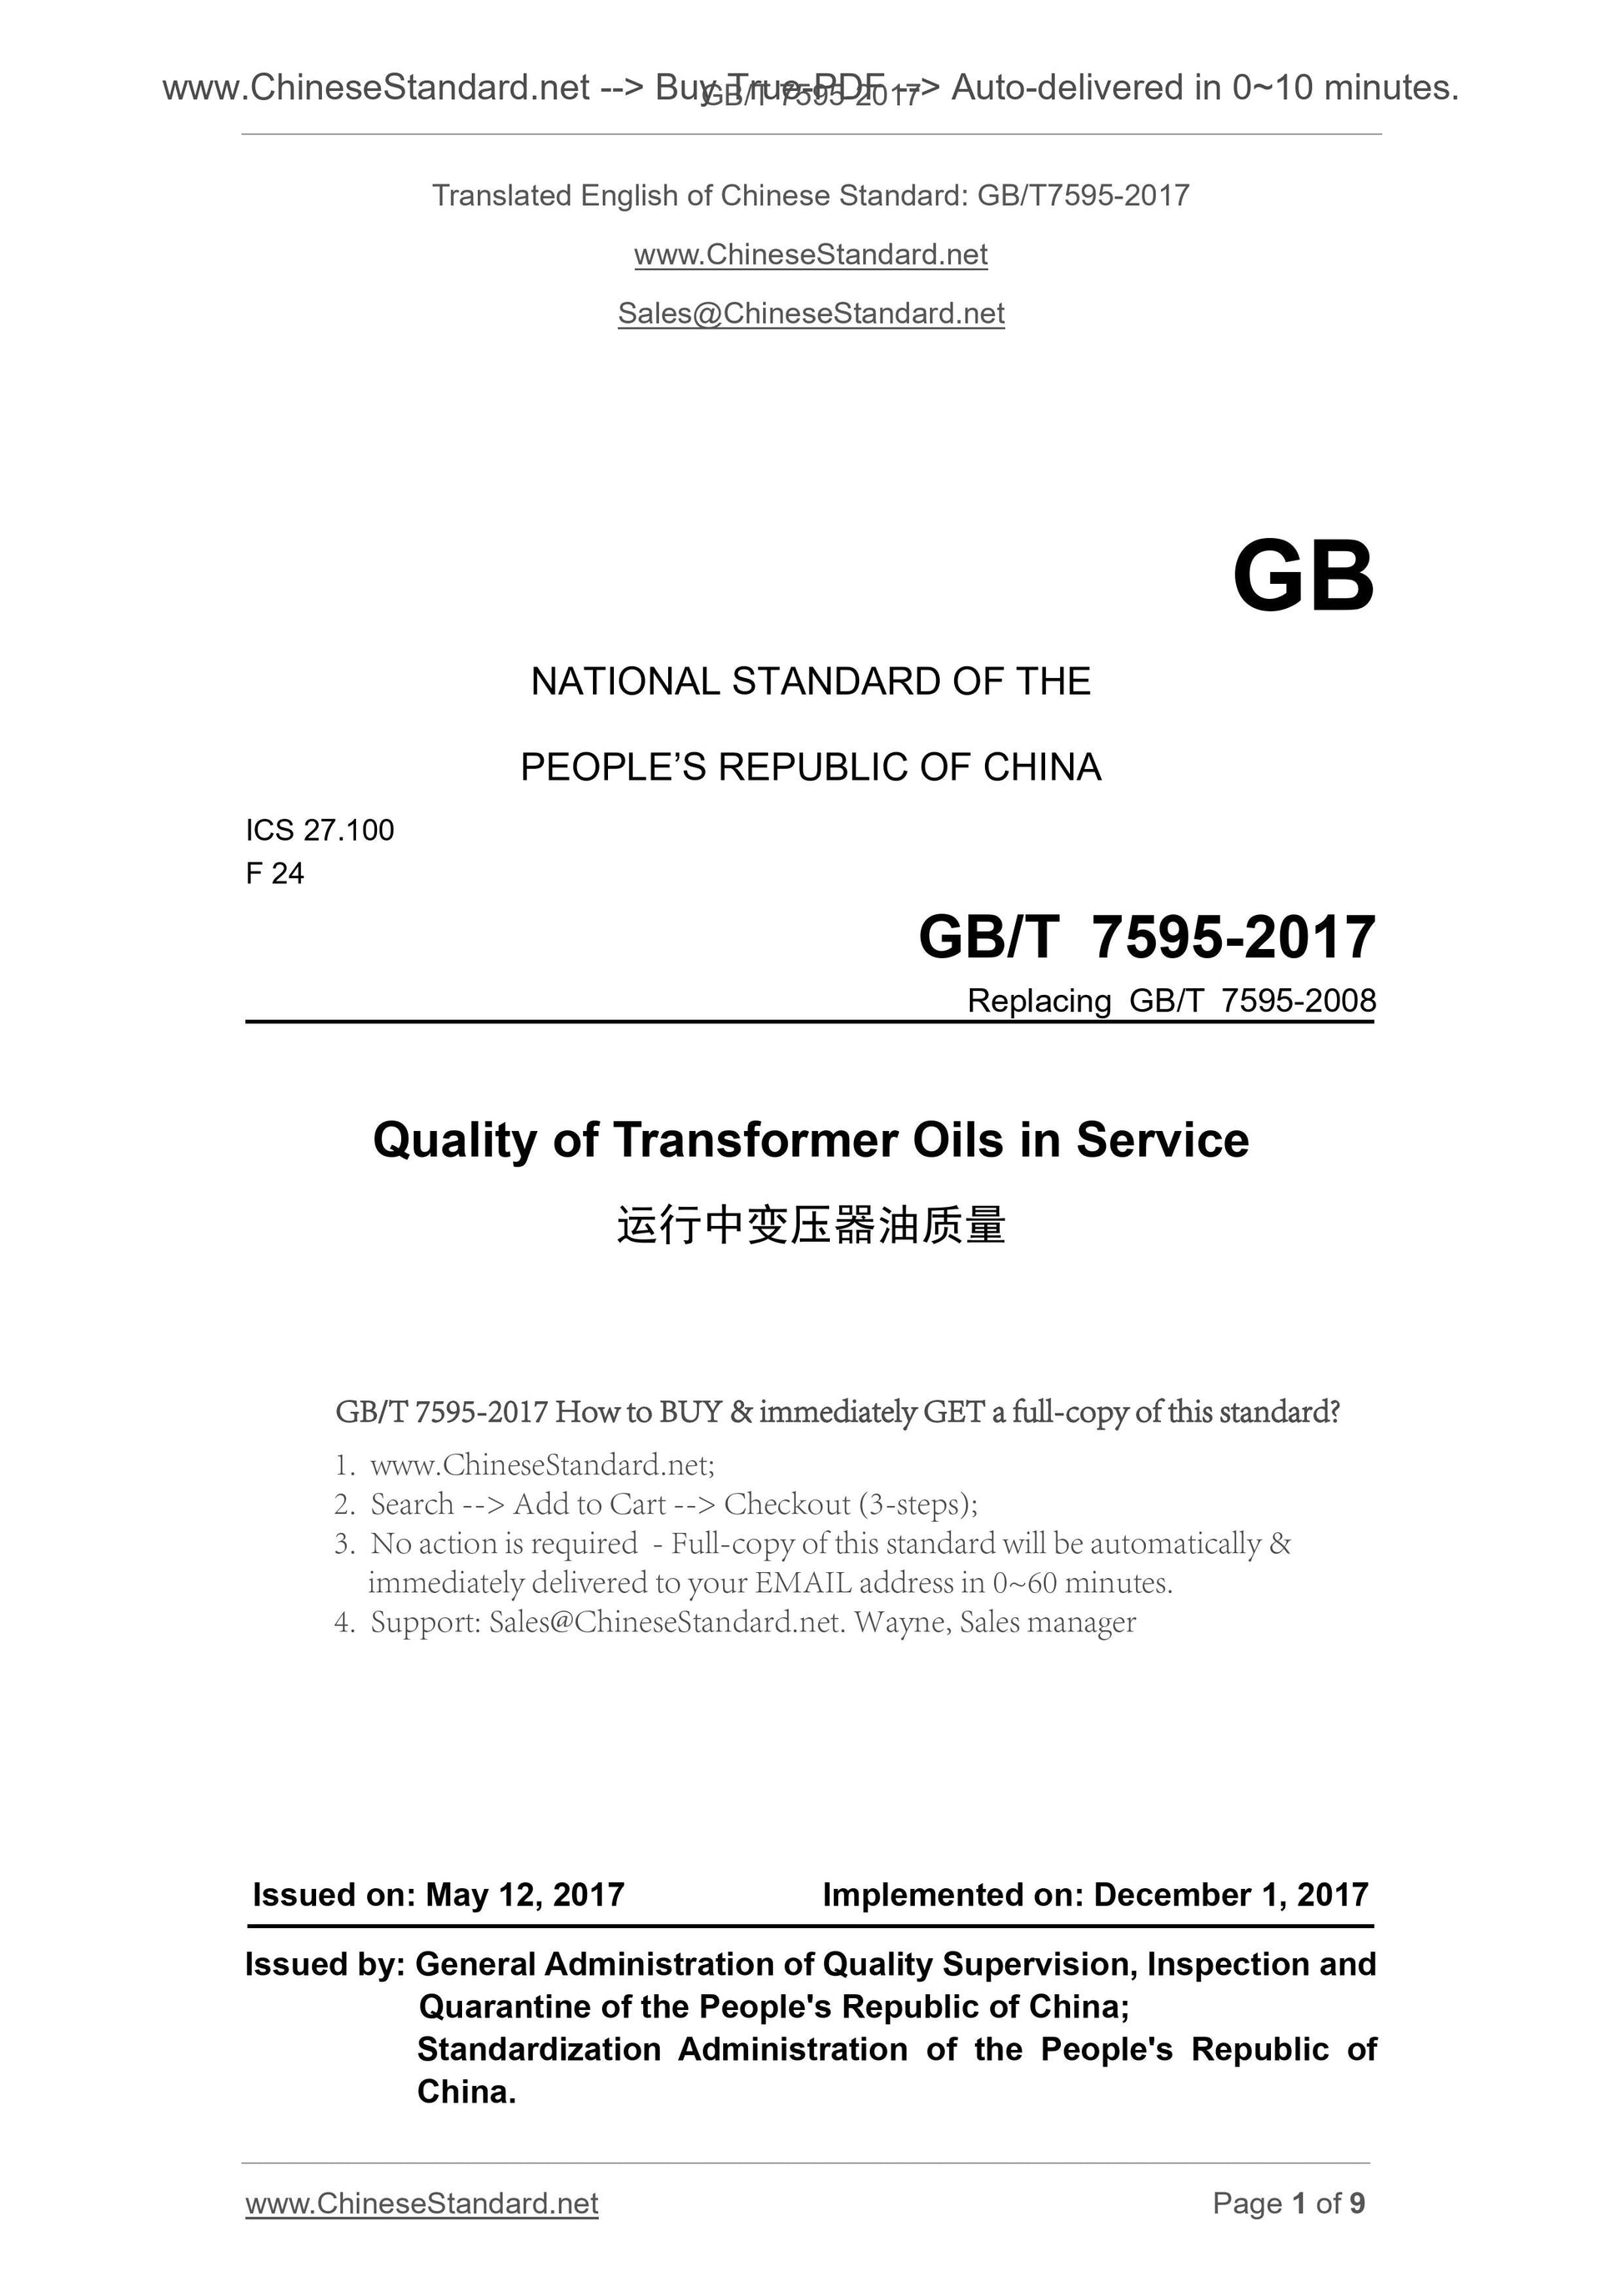 GB/T 7595-2017 Page 1